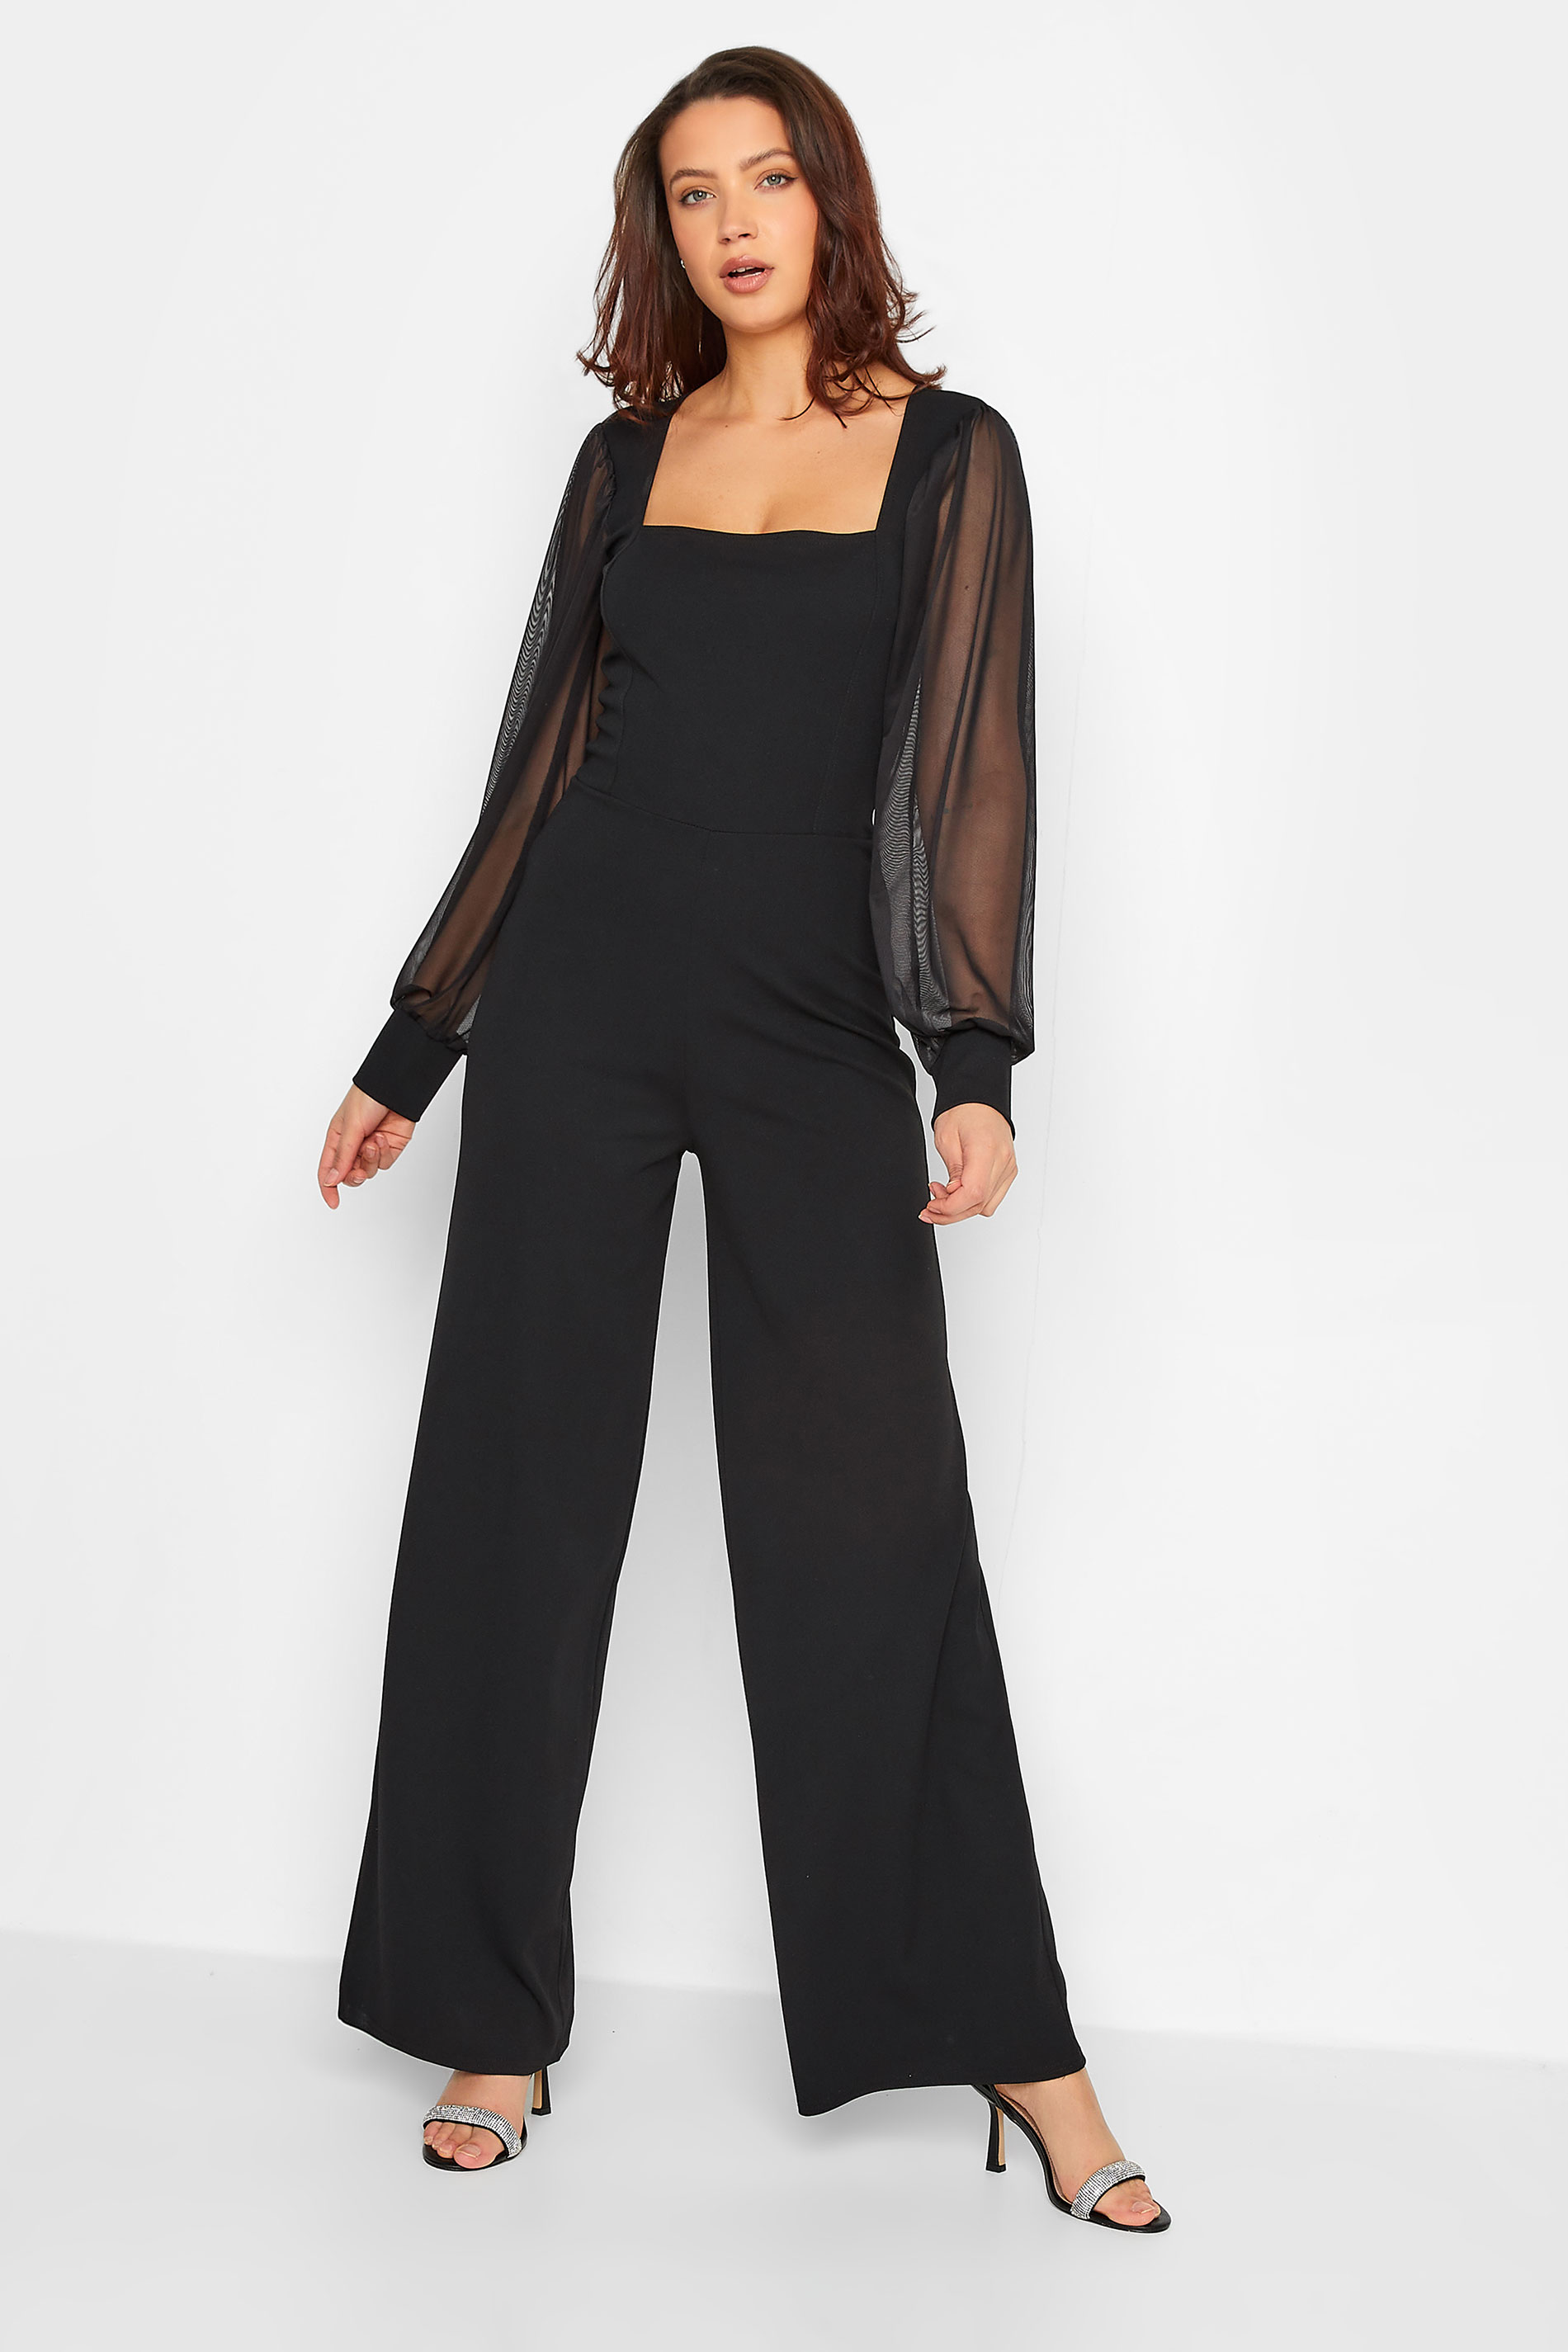 Buy Black Jumpsuits &Playsuits for Women by QUIERO Online | Ajio.com